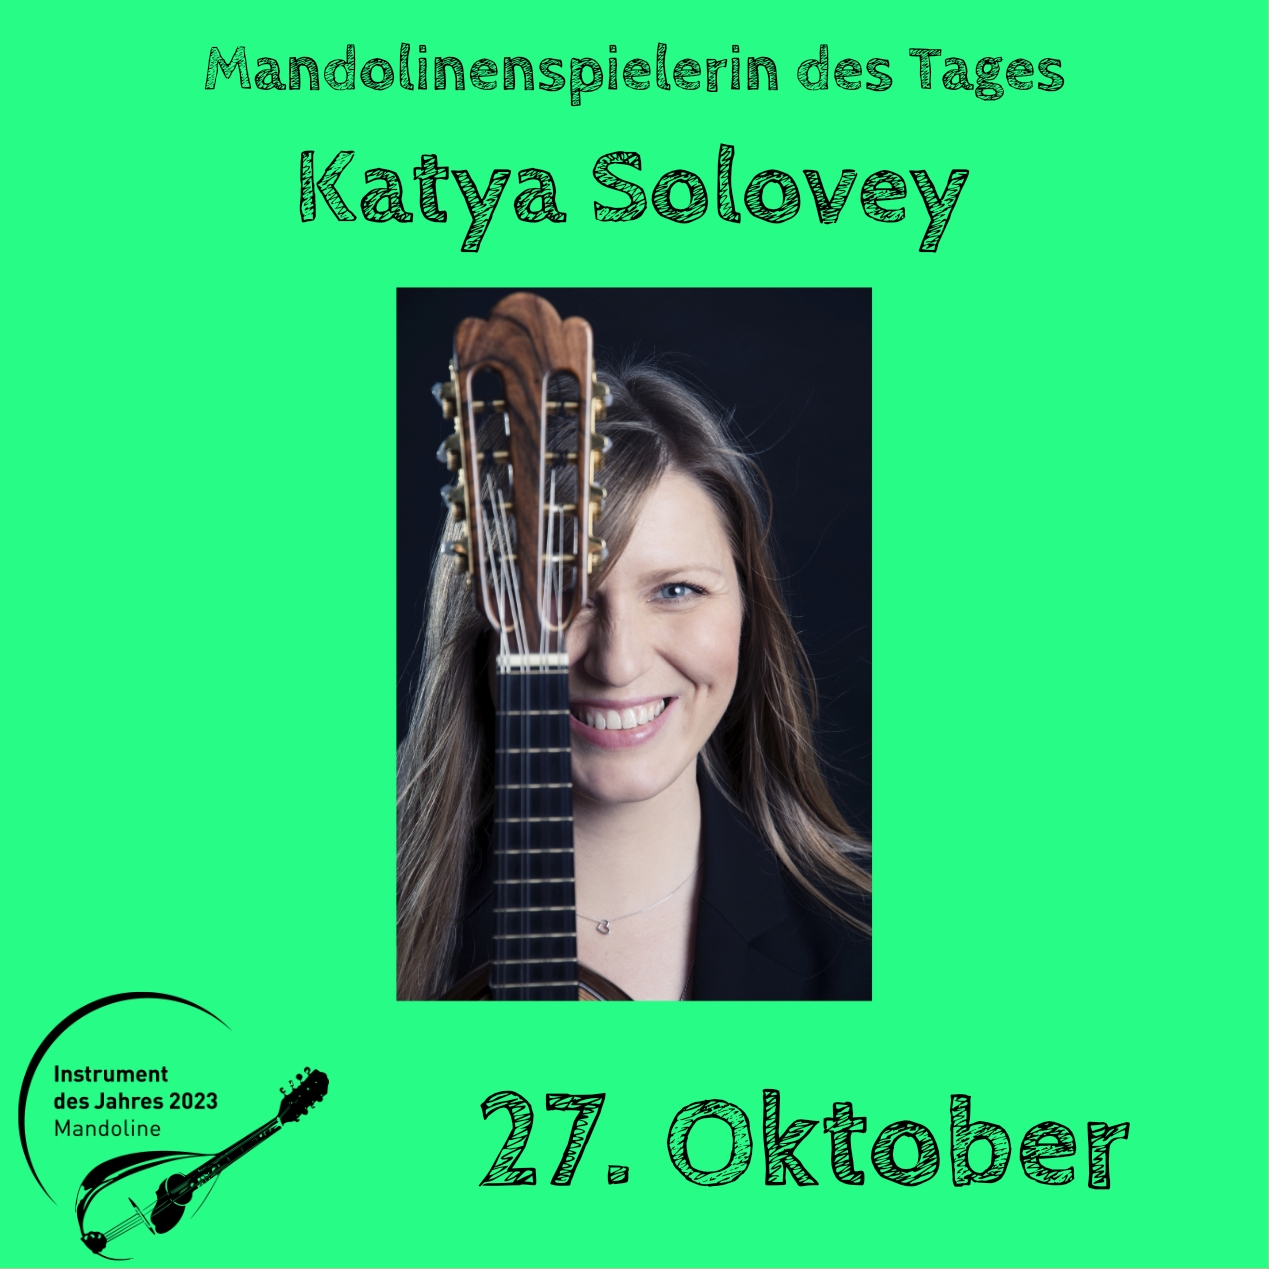 You are currently viewing 27. Oktober – Katya Solovey